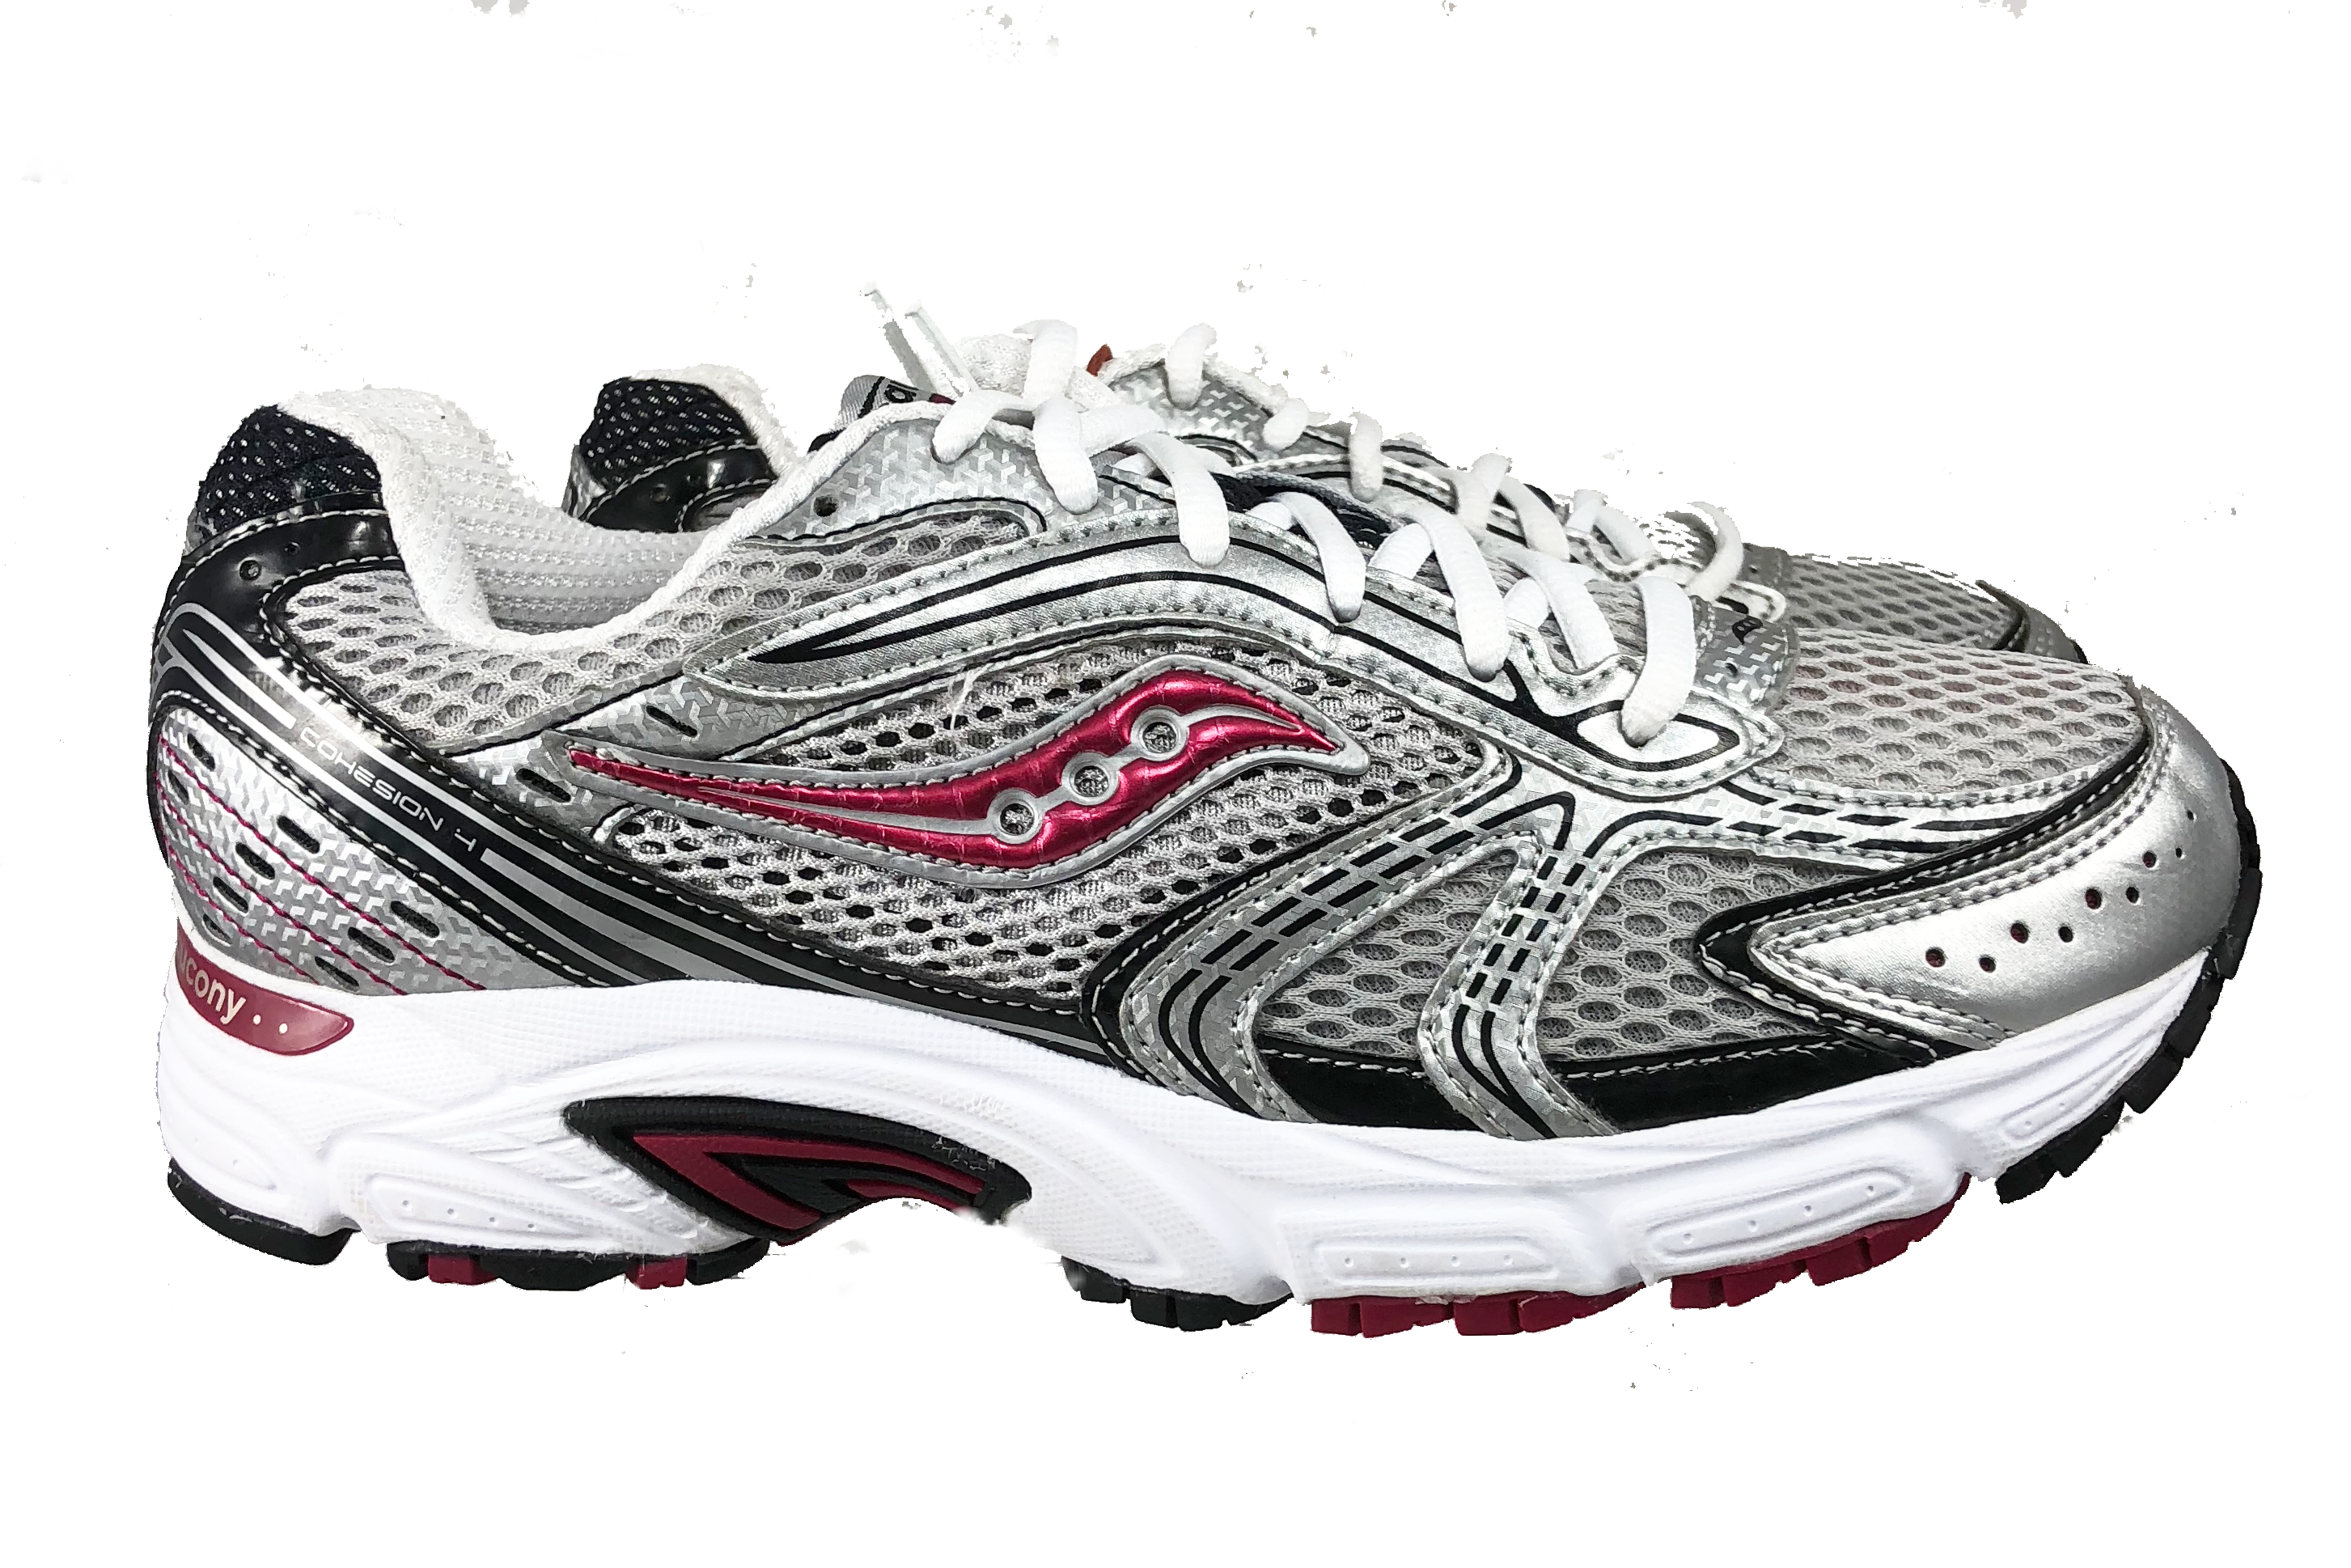 saucony grid cohesion womens